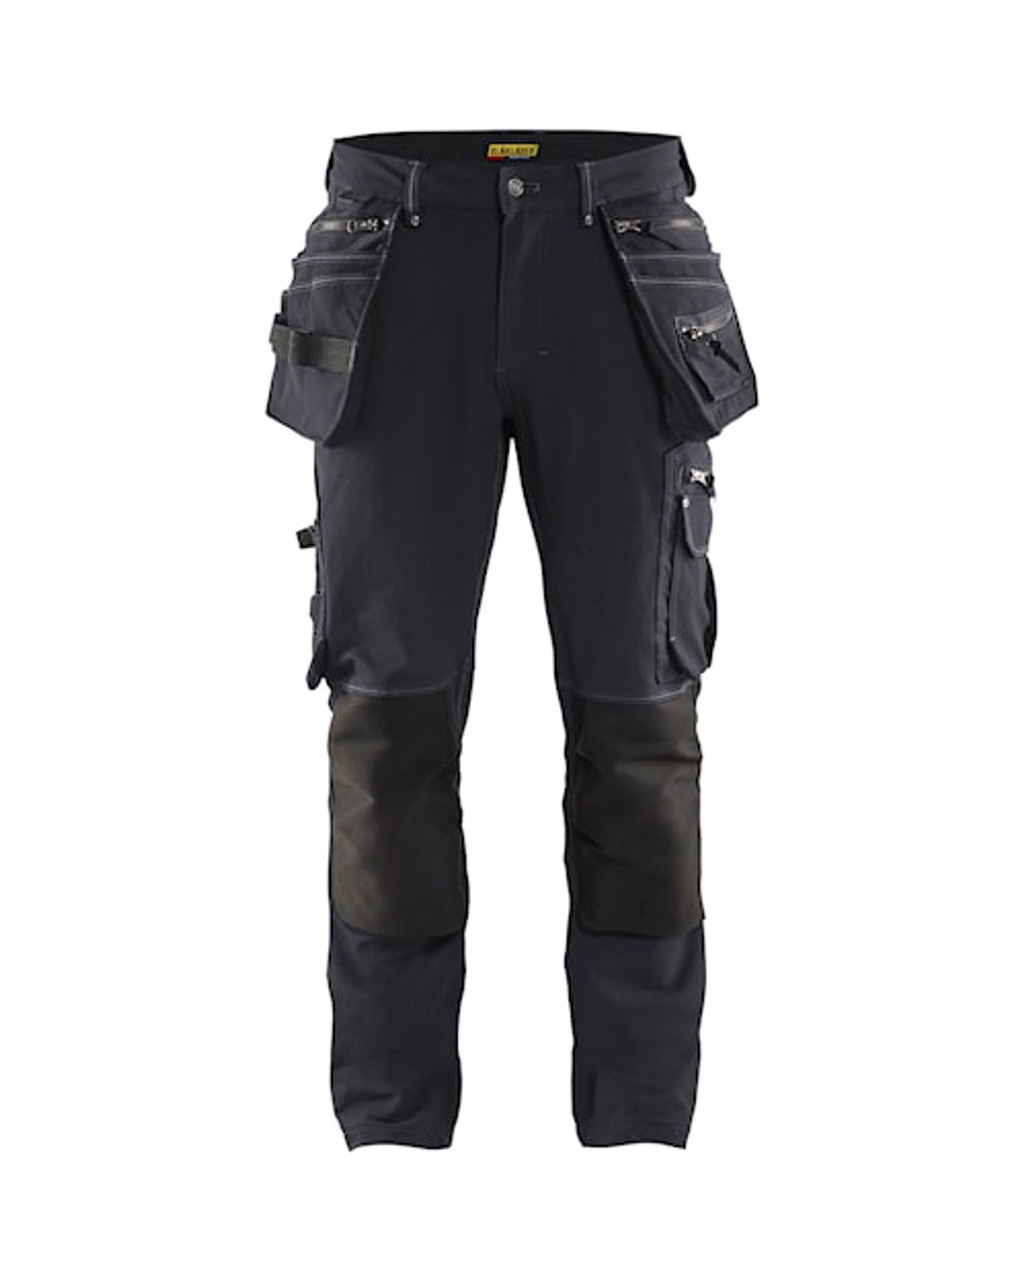 BLAKLADER  Trousers | Work Pants for Carpenters, Steelfixers, Mens Work Trousers in Melbourne and Perth.